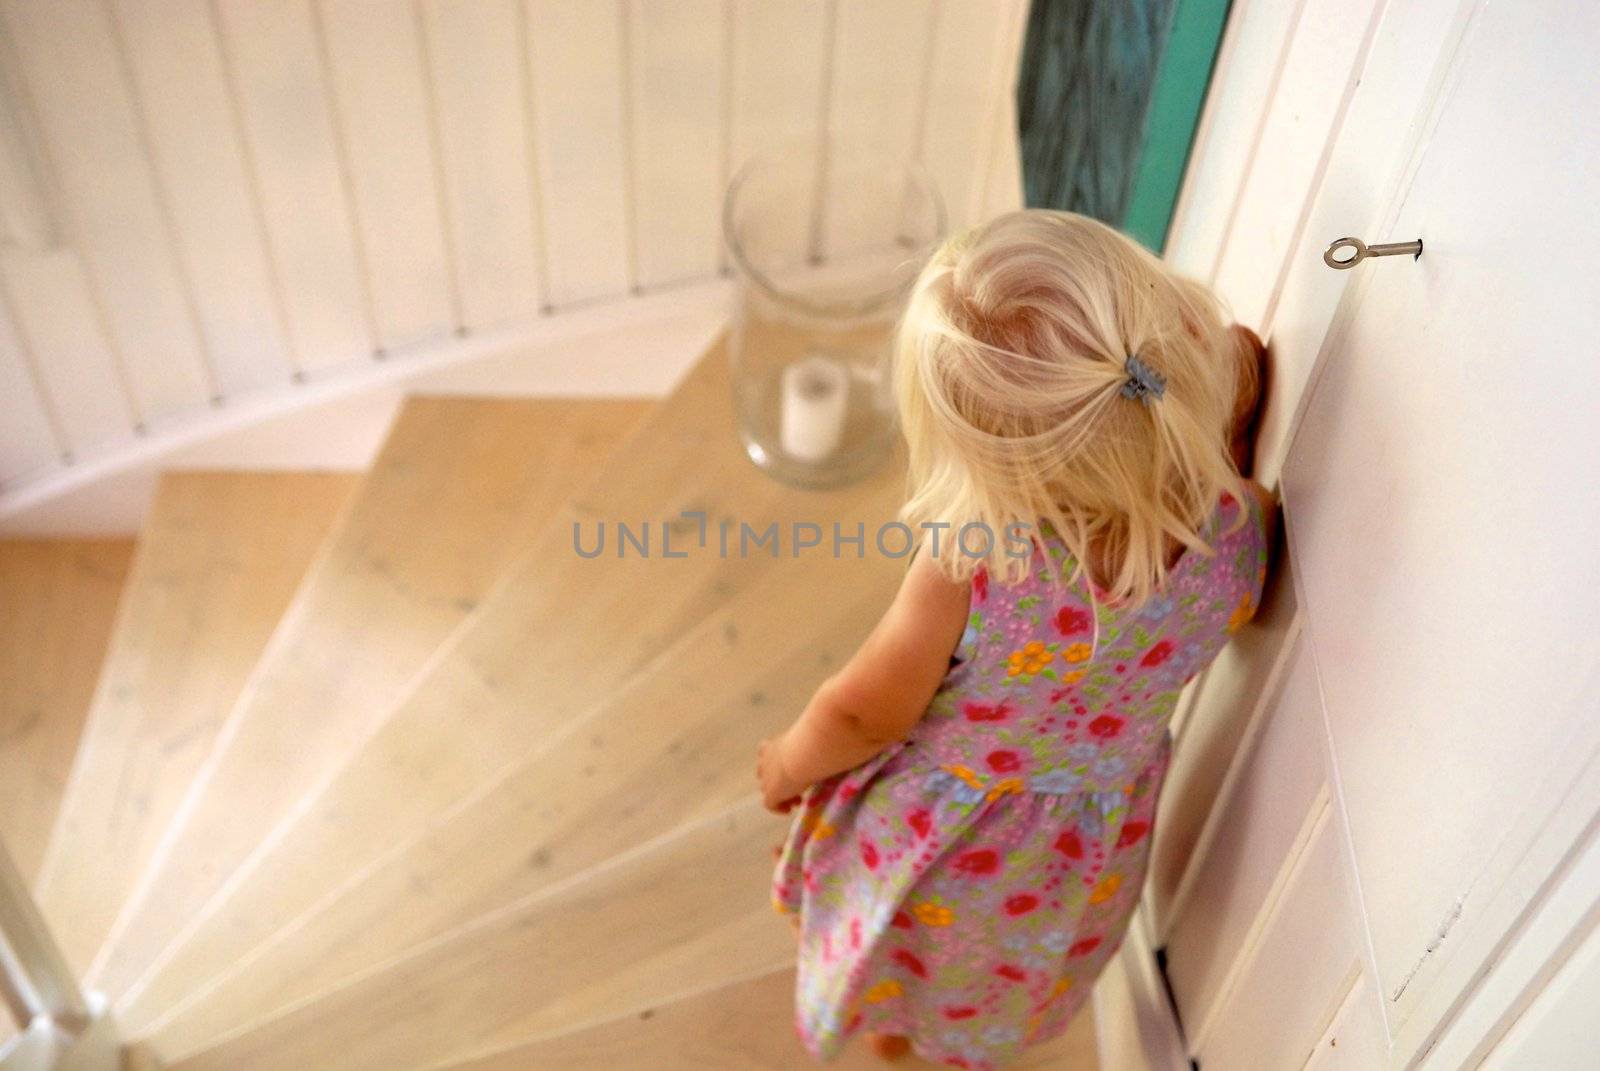 girl going down stairs. Please note: No negative use allowed.